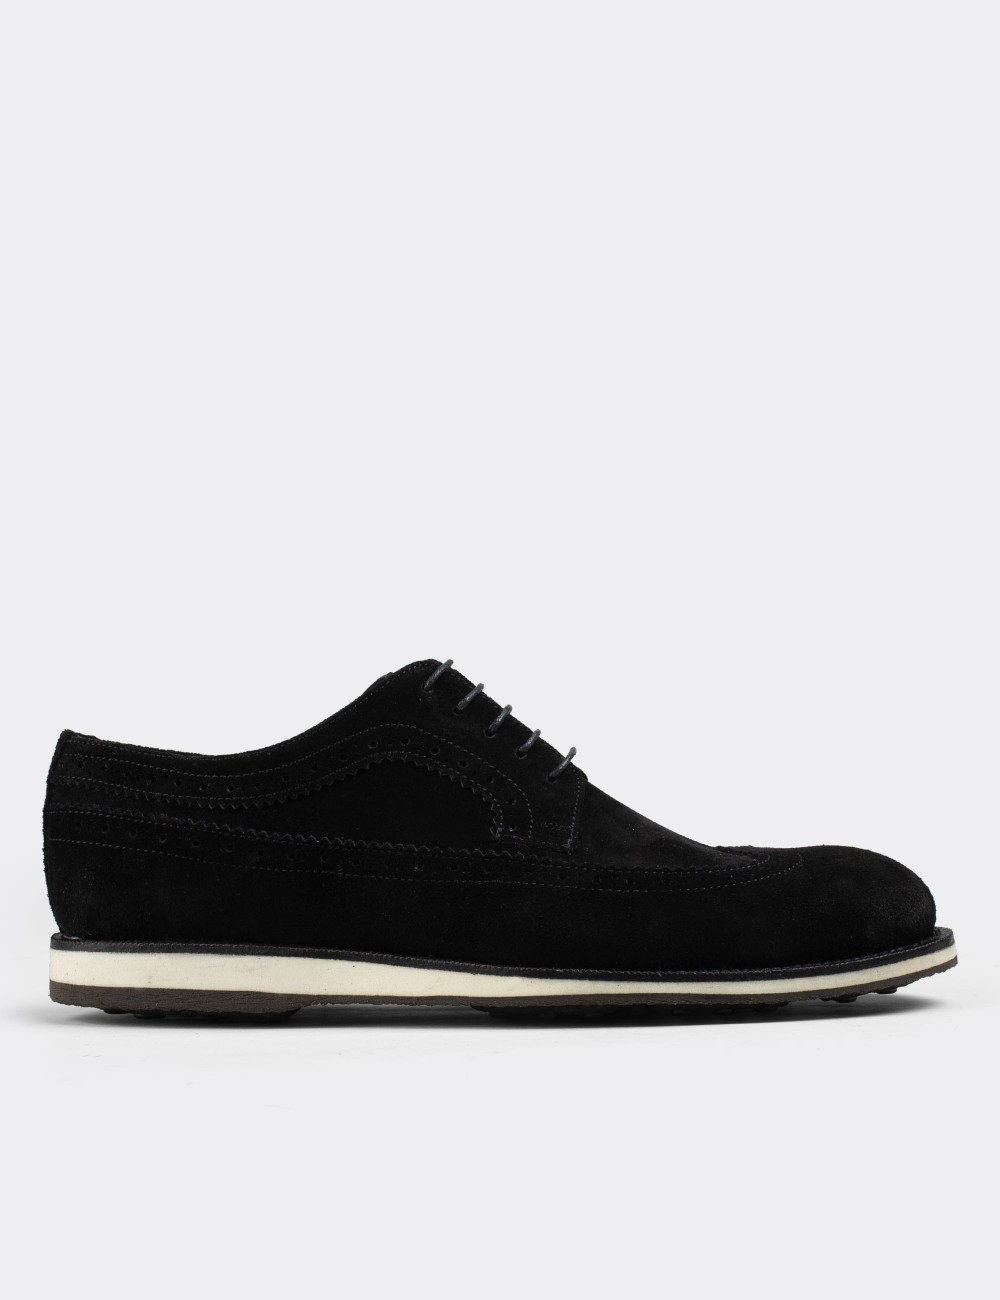 Black Suede Leather Lace-up Shoes - 01293MSYHE36